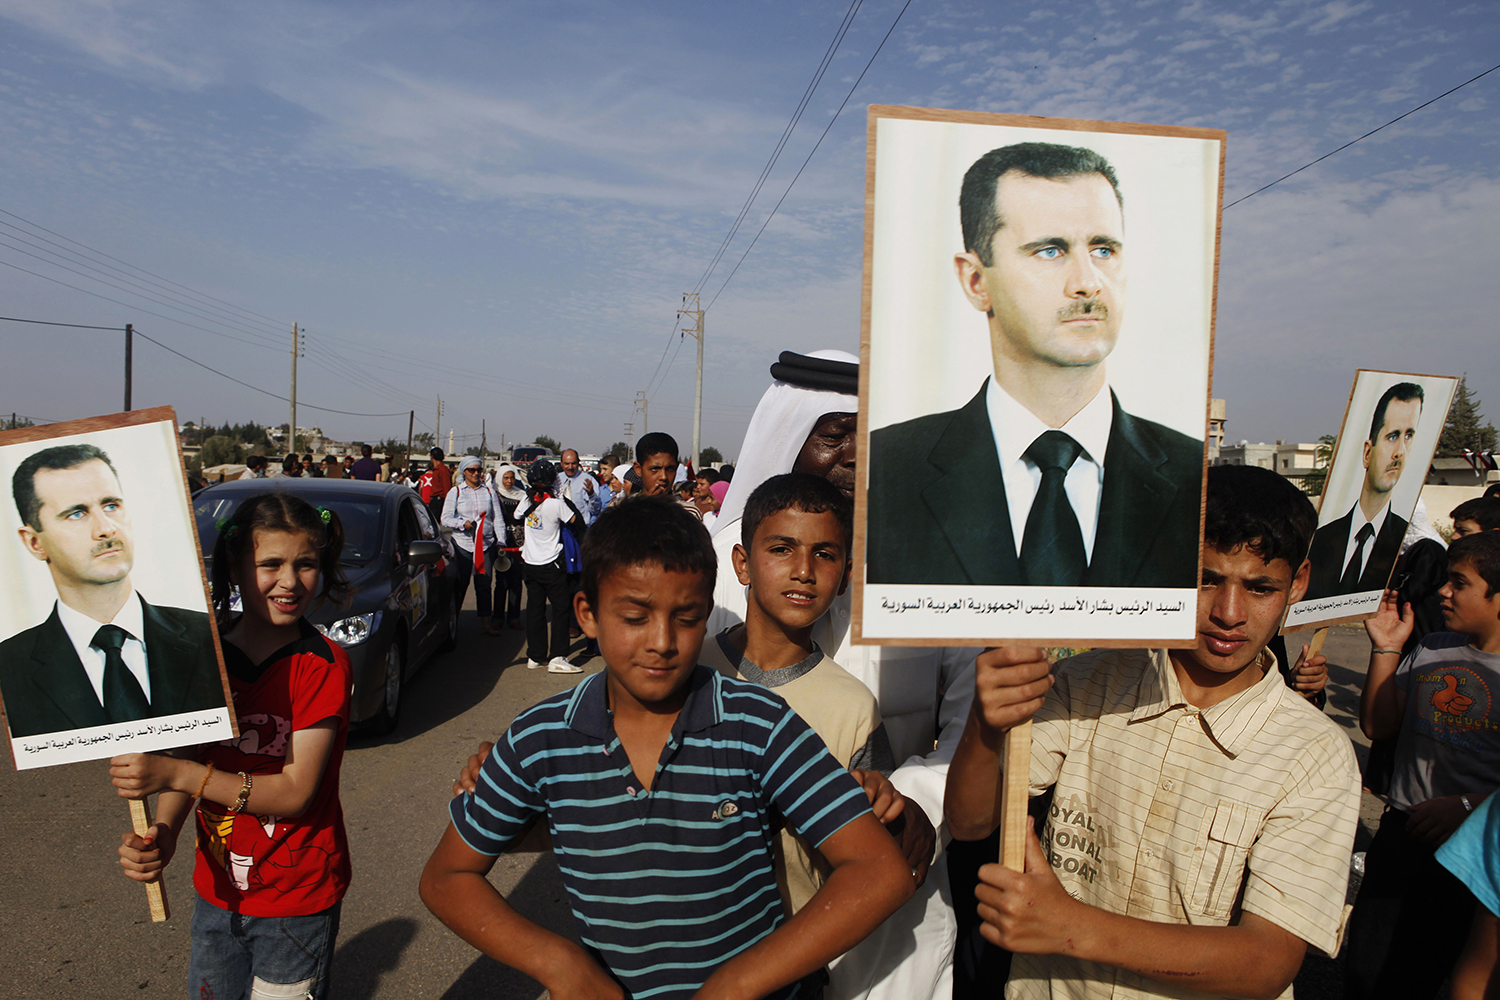 15 Children hold placards of President Asad, to welcome foreigners under supervision from state police, Darra, Syria. jpg